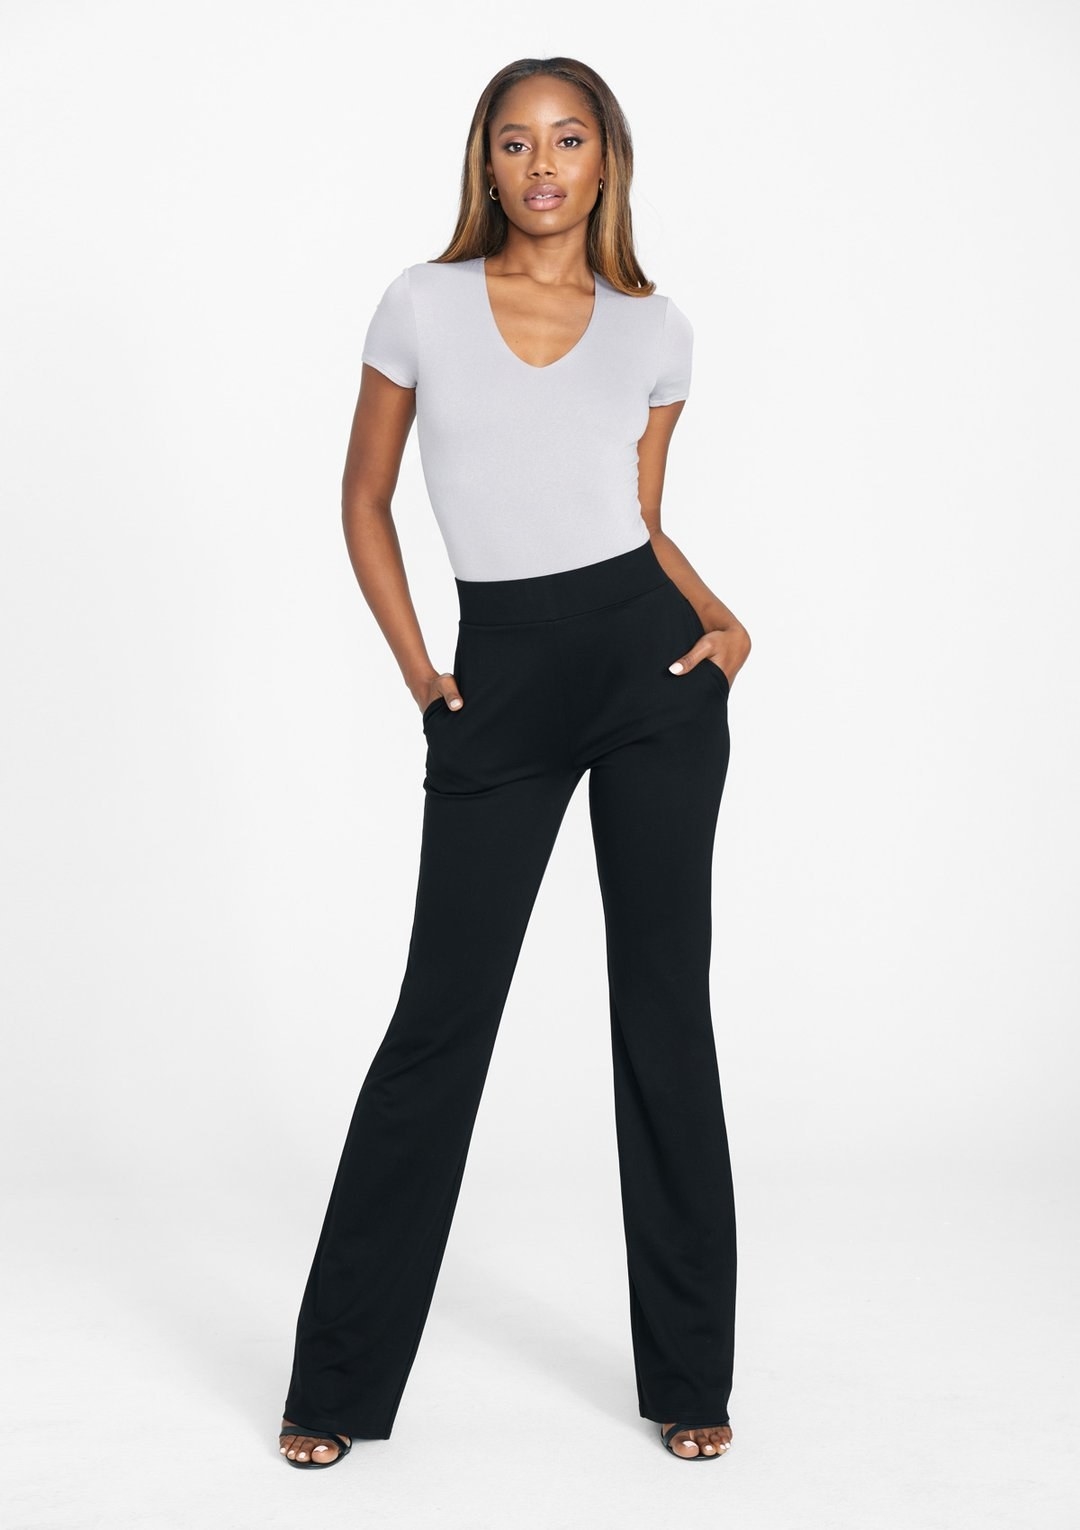 tall and thin women's clothing